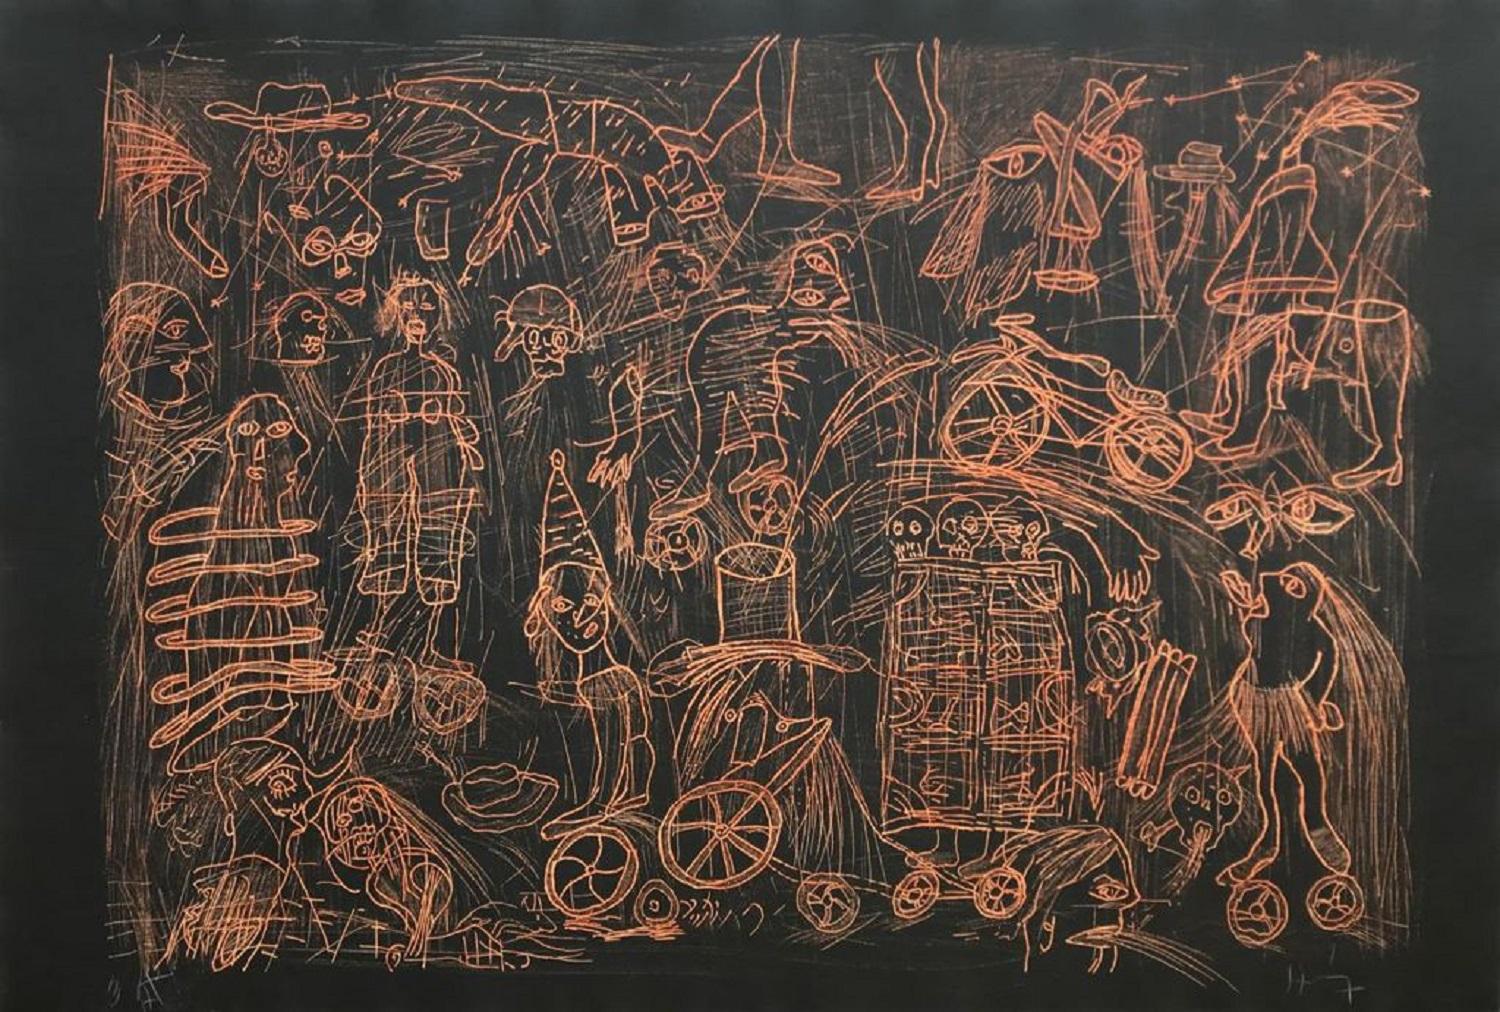 Sergio Hernández (Mexico, 1957)
'Untitled', 2011
woodcut on paper
29.6 x 41.4 in. (75 x 105 cm.)





















